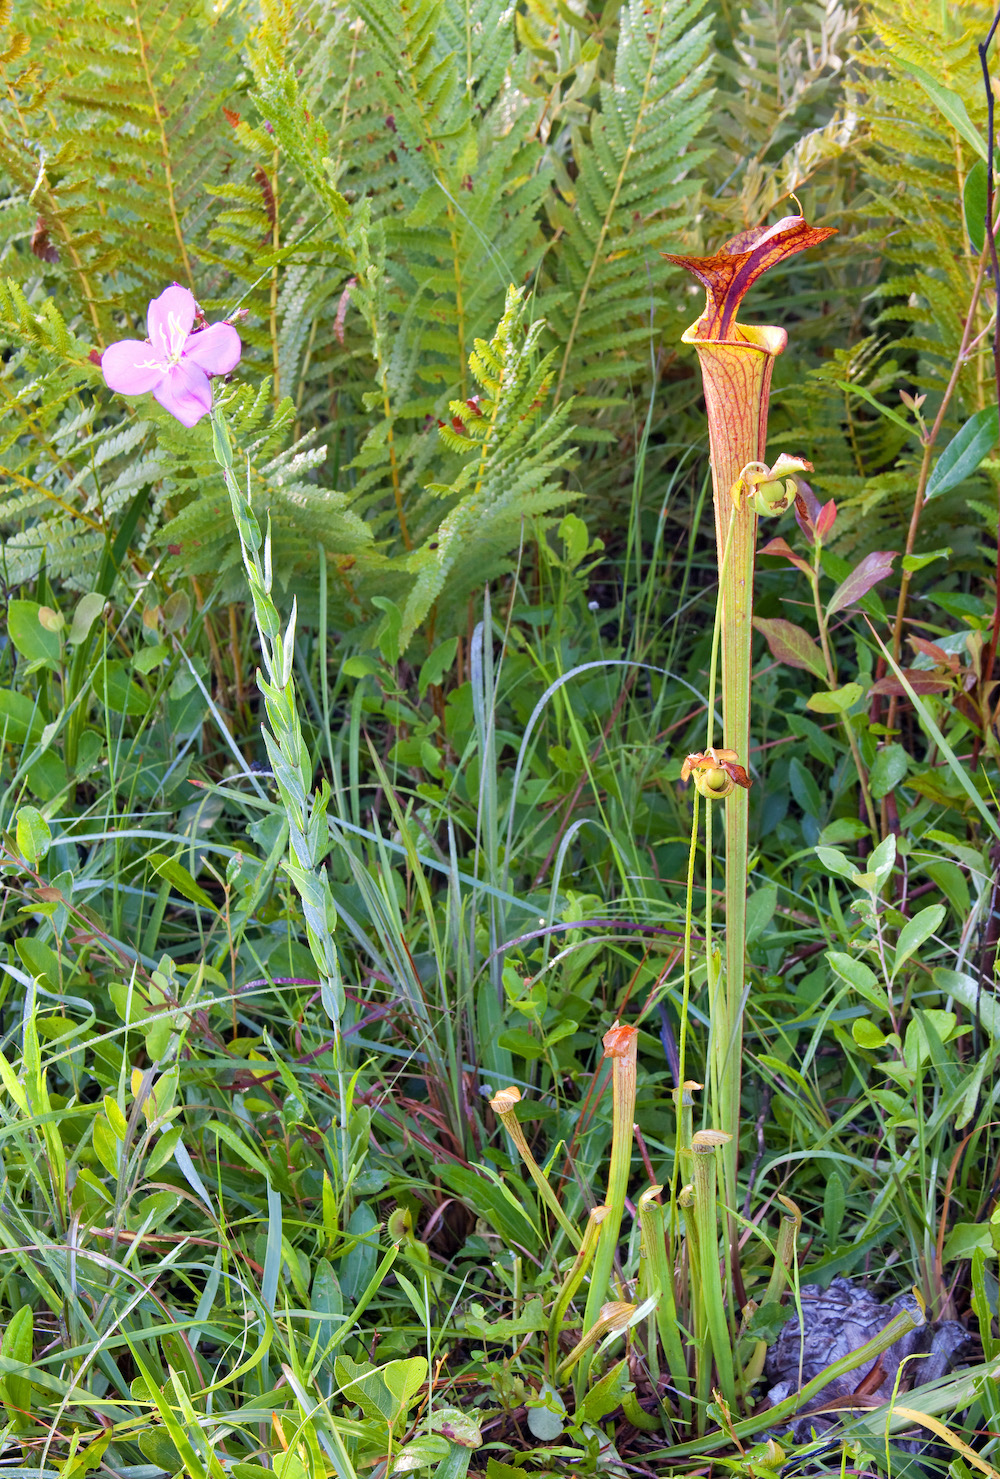 One large pitcher plant stands above smaller plants on a grassy forest floor.